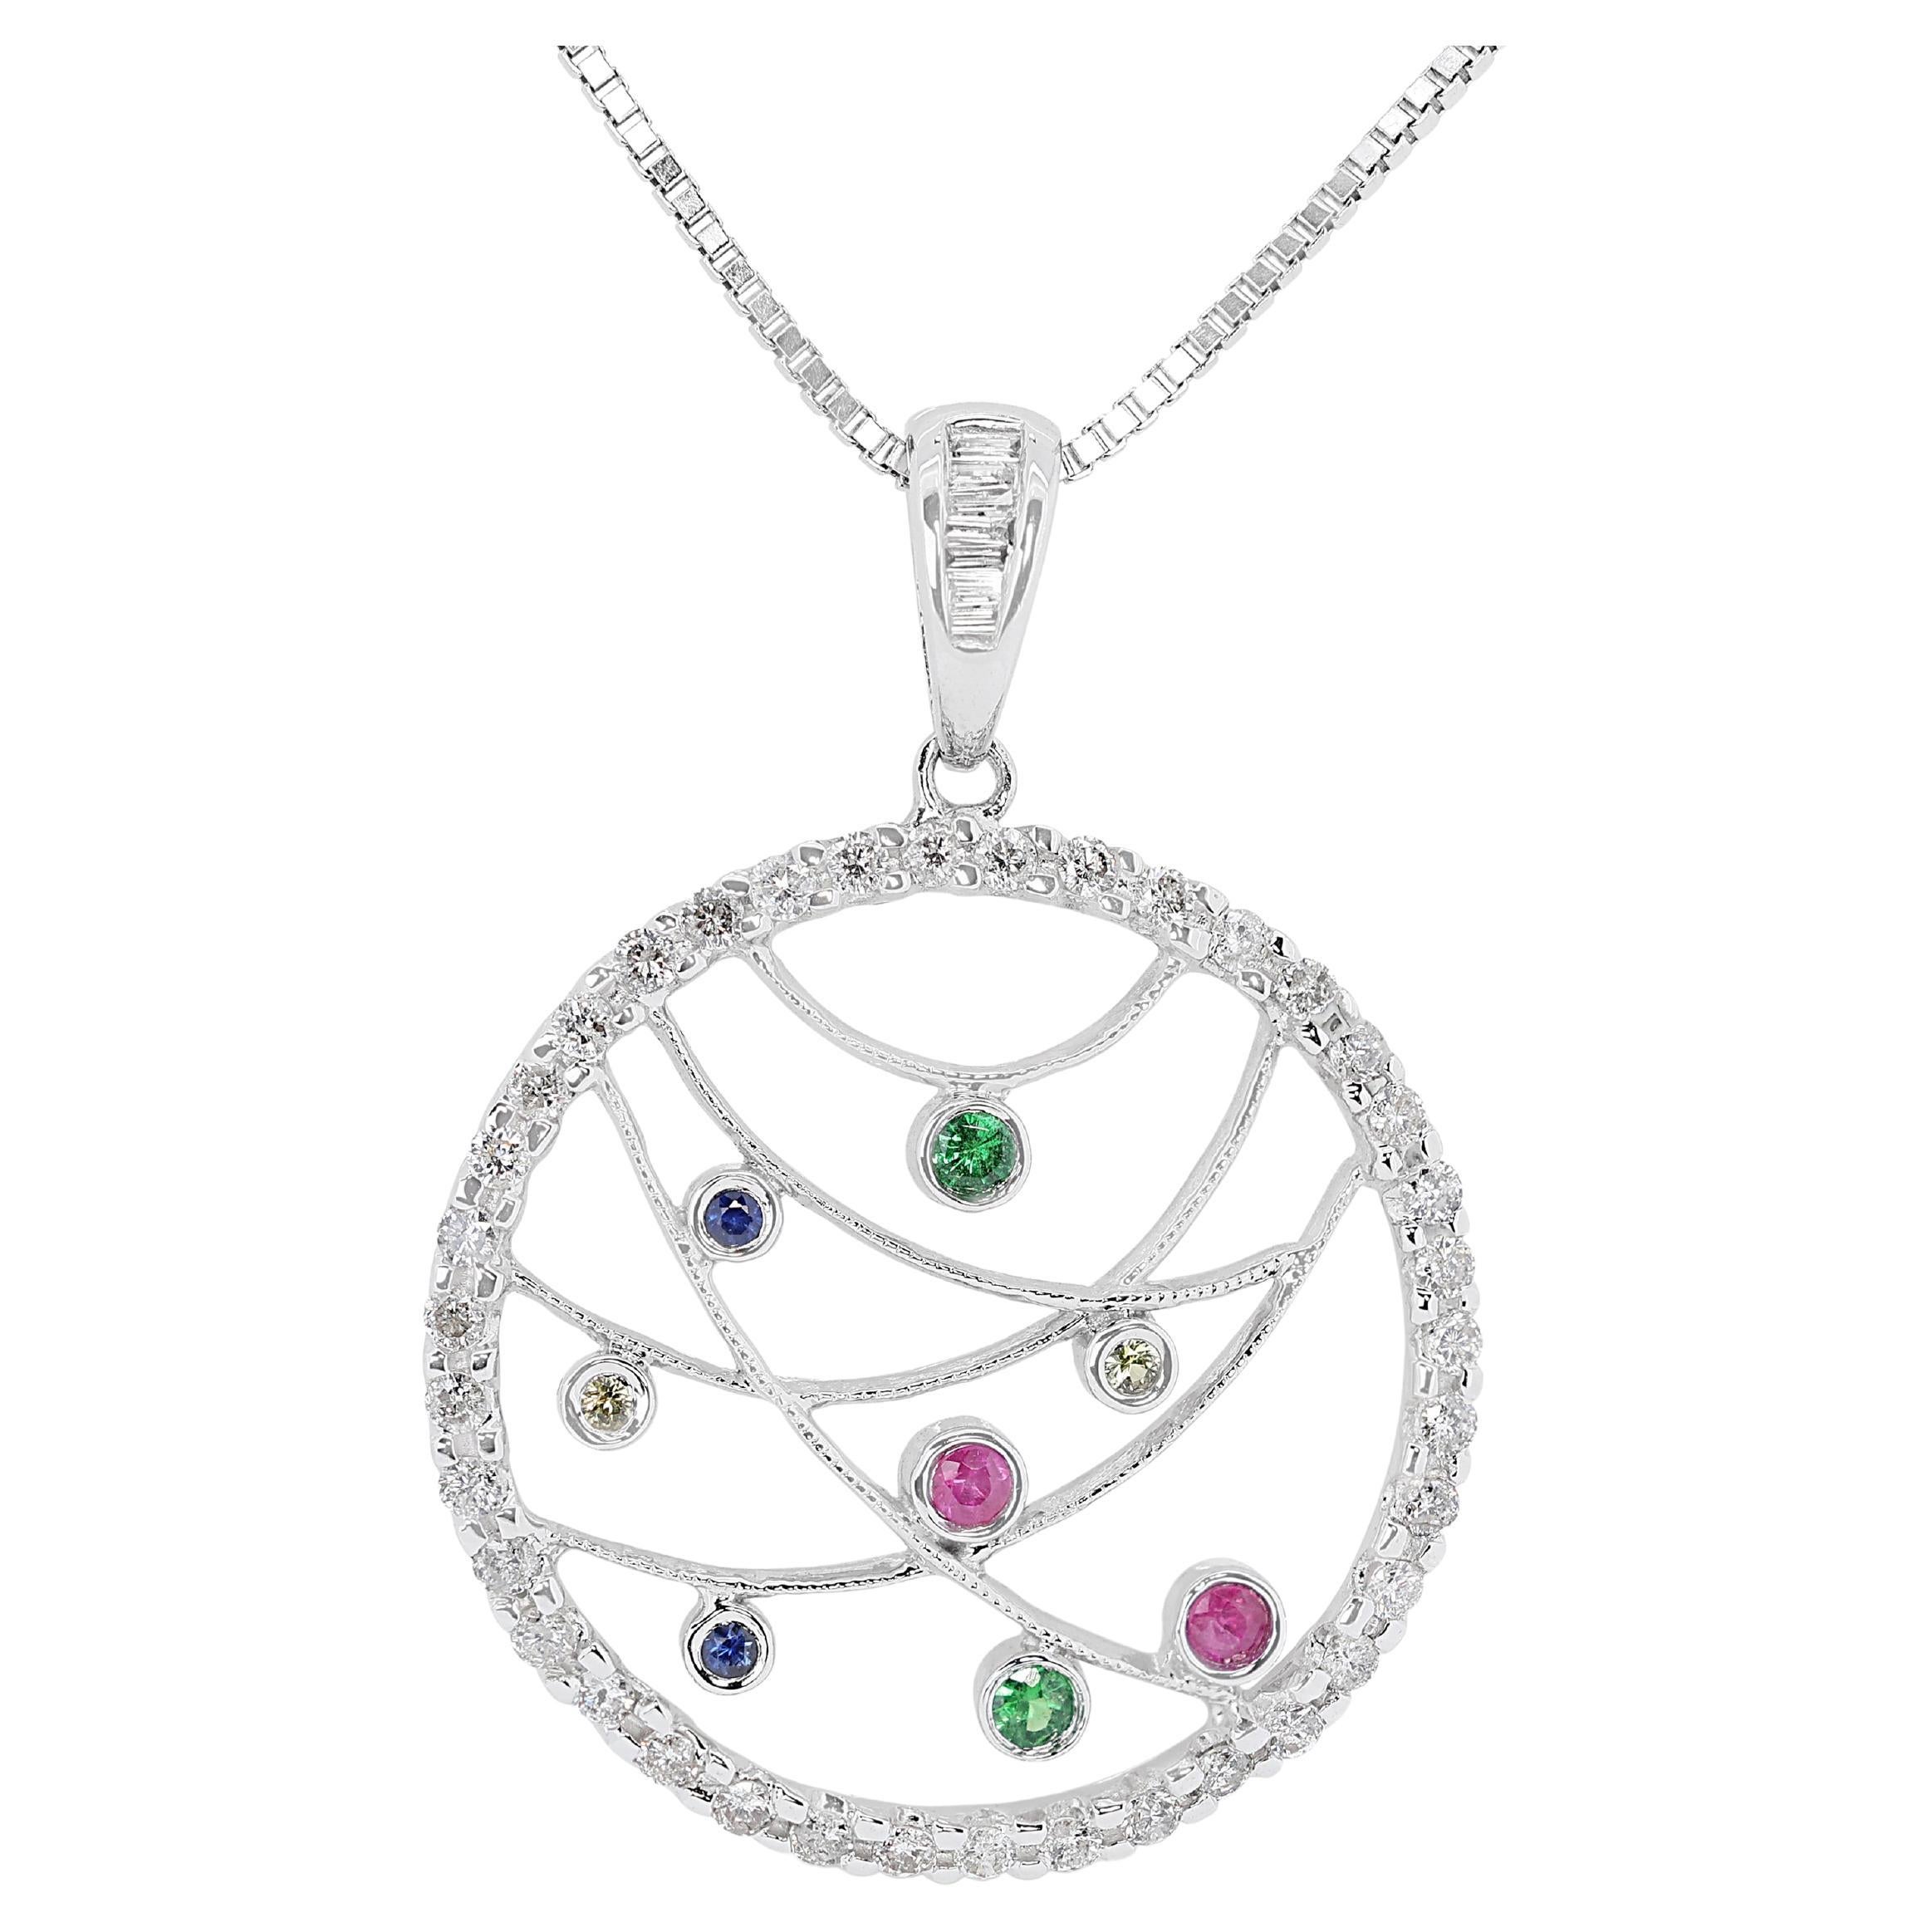 Dazzling 0.62ct Mixed Stones w/ Diamonds in 18K White Gold (Chain Not Included) For Sale